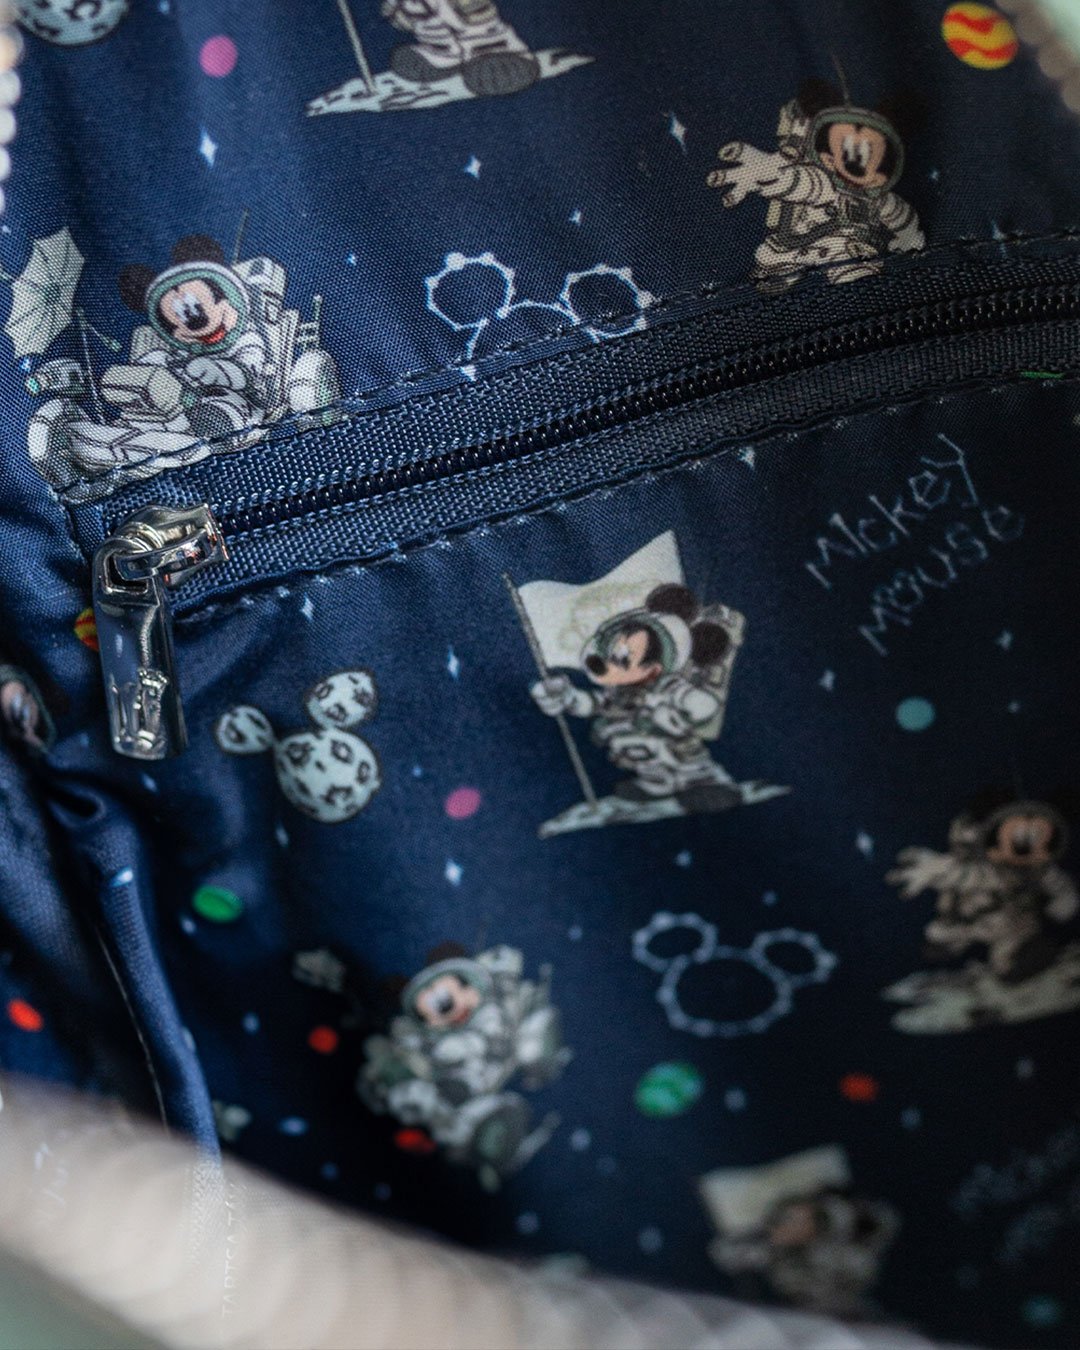 671803464285 - 707 Street Exclusive - Loungefly Disney Glow in the Dark Mickey Mouse Spaceman Cosplay Mini Backpack - IRL 03